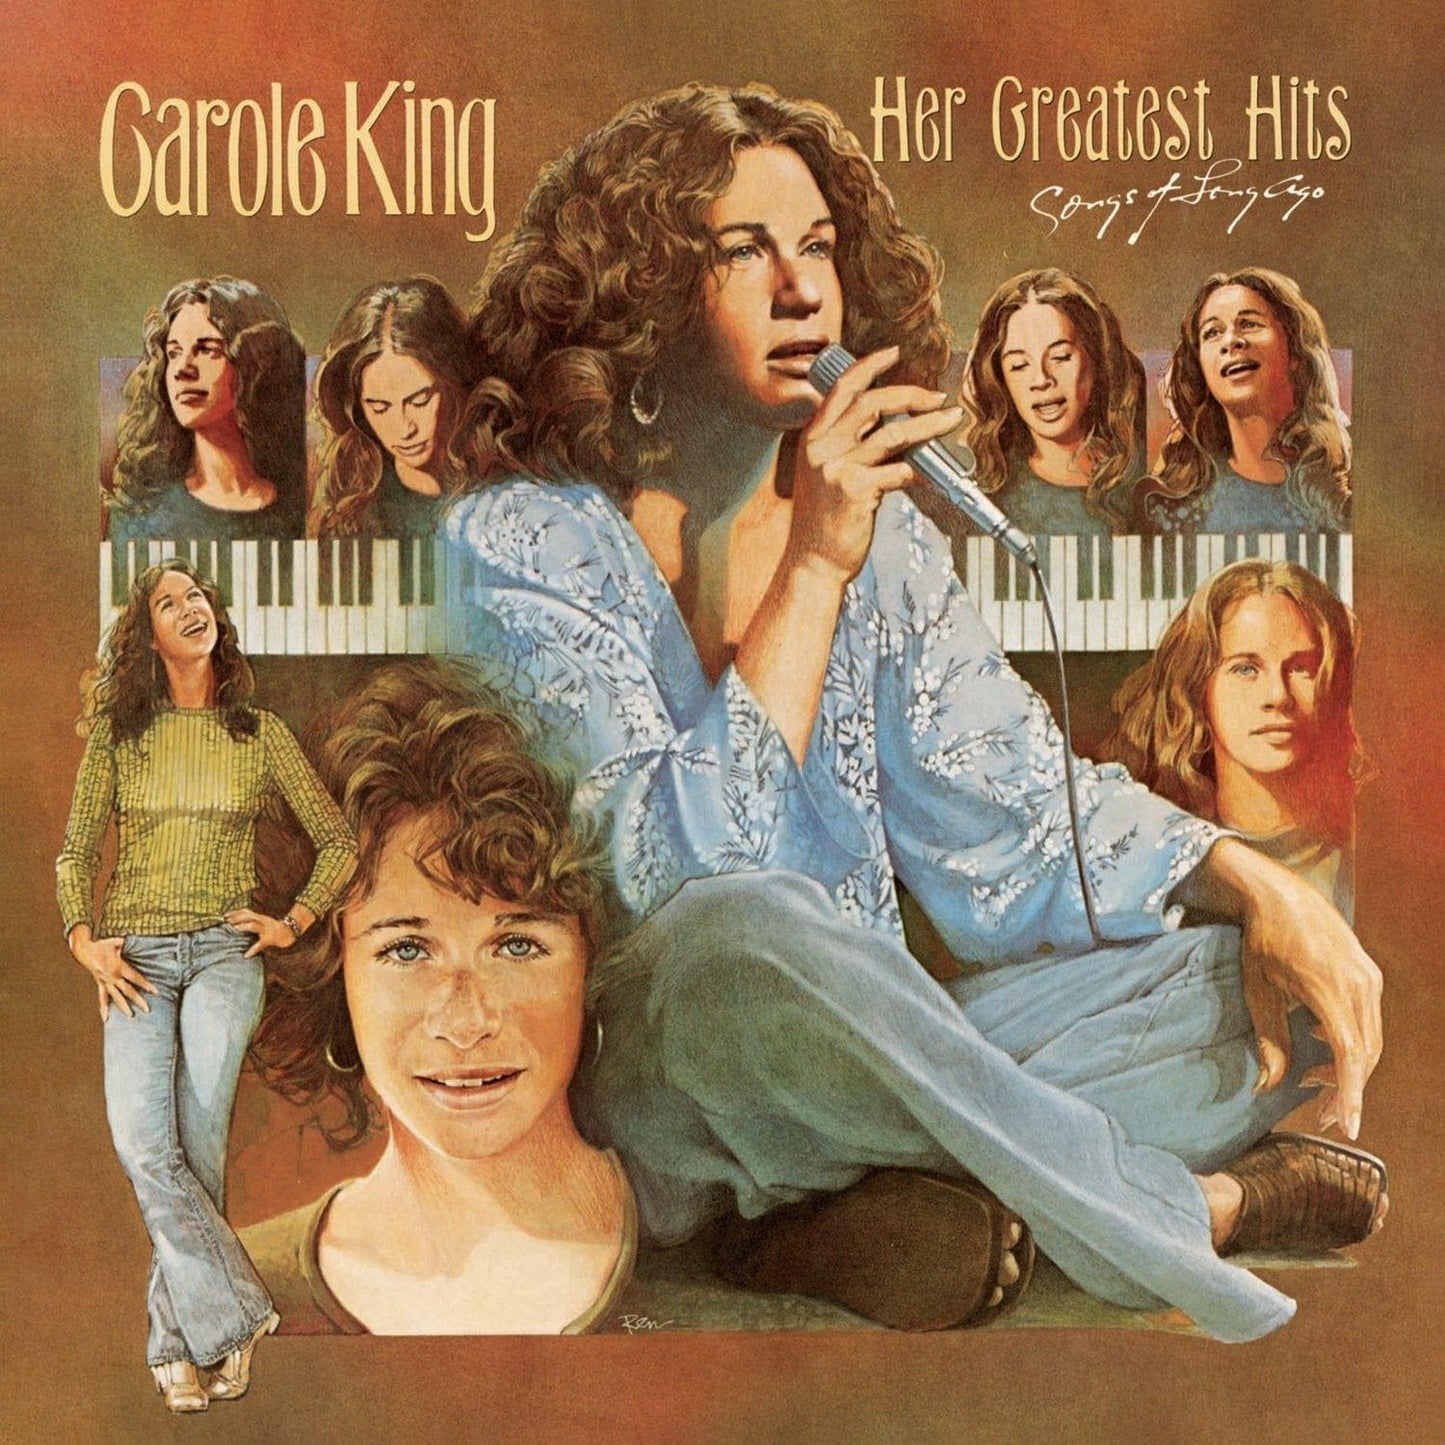 Carole King - Her Greatest Hits (Songs Of Long Ago) (Remastered, 140 Gram) (LP) - Joco Records